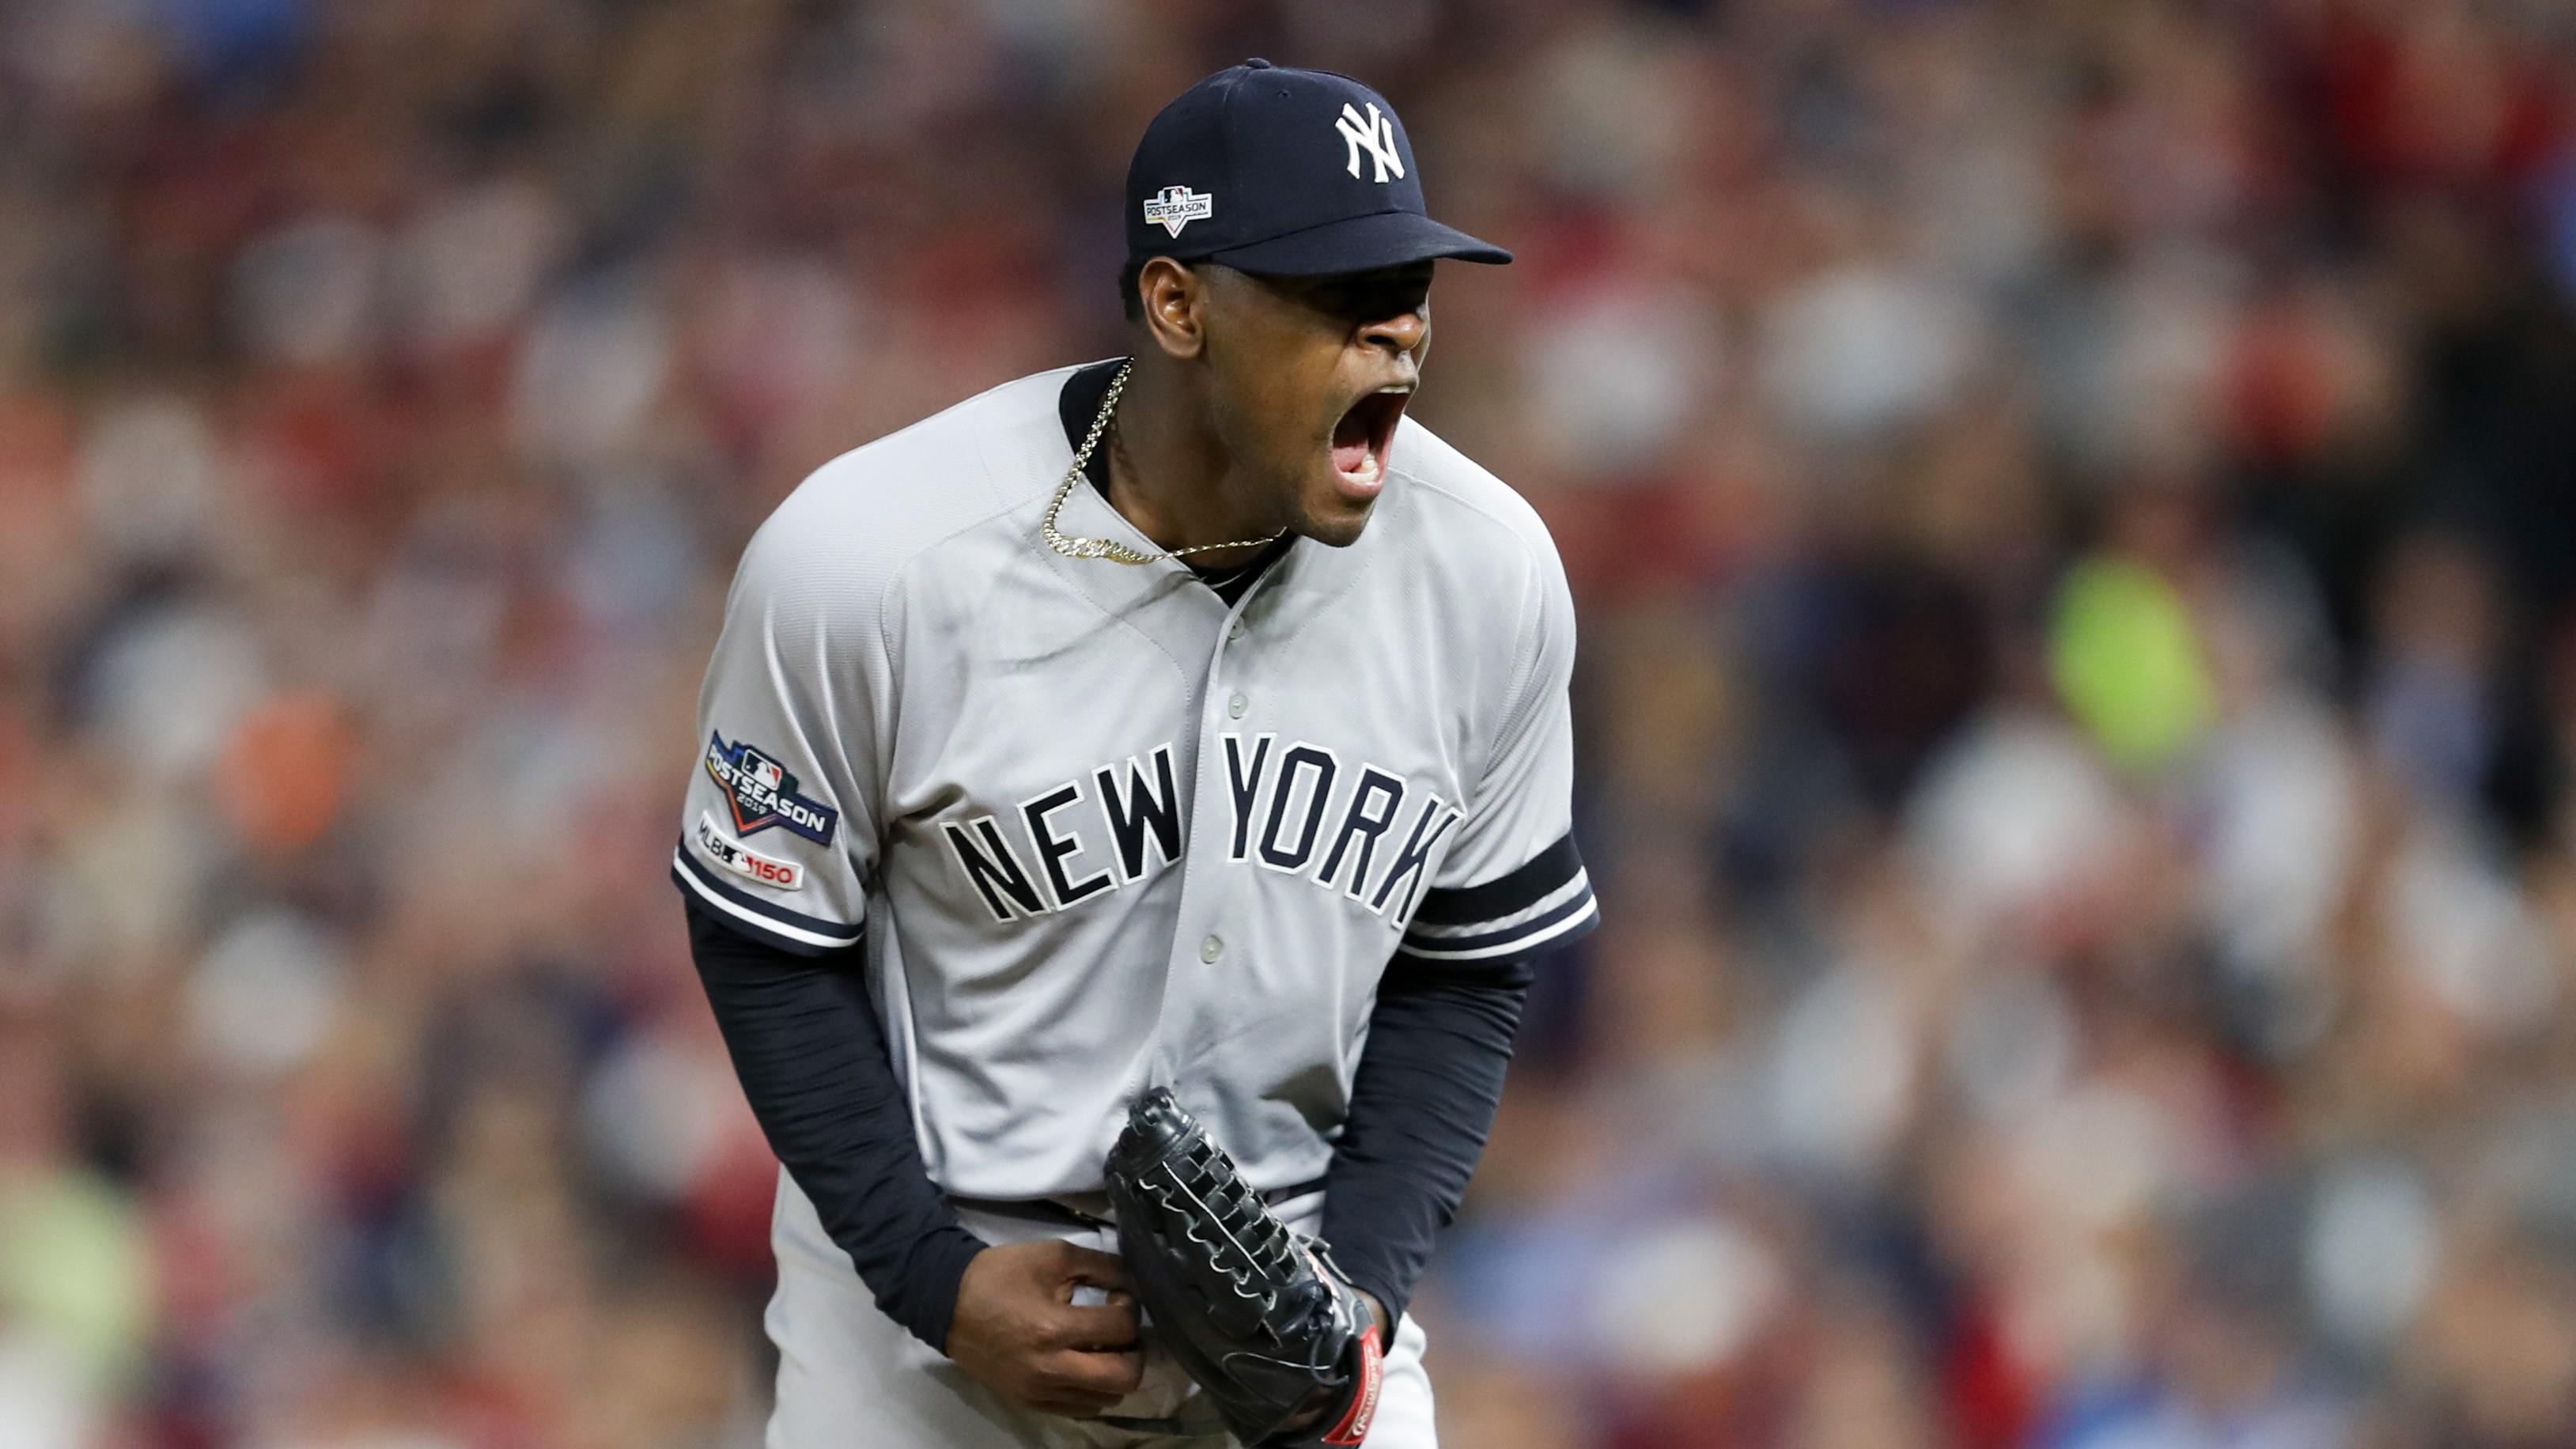 Oct 7, 2019; Minneapolis, MN, USA; New York Yankees starting pitcher Luis Severino (40) reacts during the second inning of game three of the 2019 ALDS playoff baseball series against the Minnesota Twins at Target Field. Mandatory Credit: Jesse Johnson-USA TODAY Sports / Jesse Johnson-USA TODAY Sports